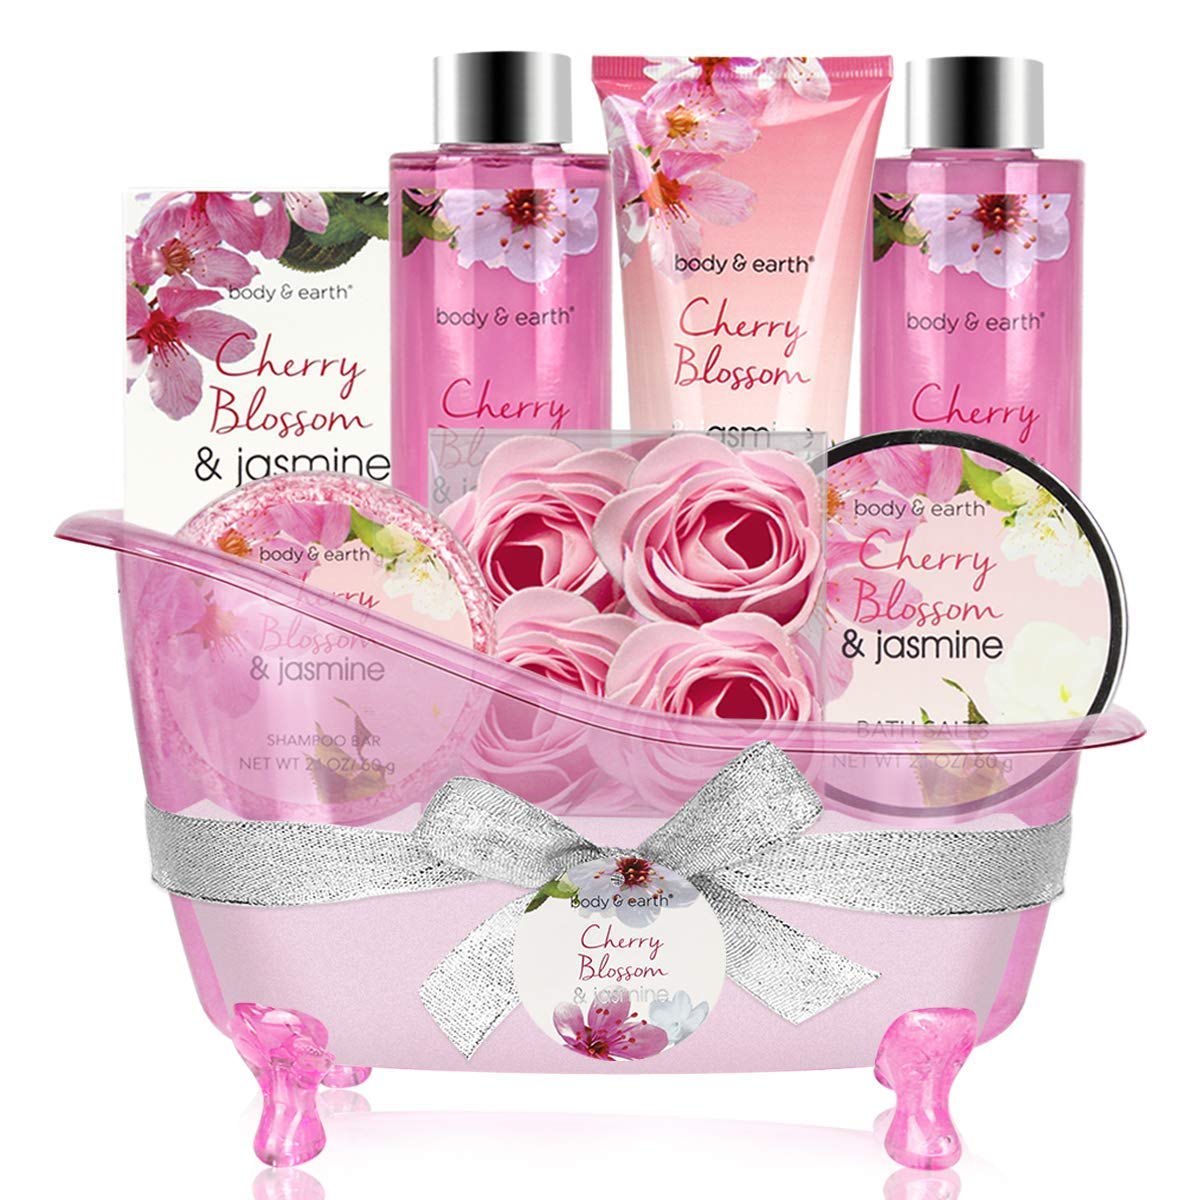 BODY & EARTH Gift Sets for Women, 8pcs Gift Basket with Cherry Blossom&Jasmine, Includes Bubble Bath, Shower Gel, Soap, Body Lotion, Bath Salts, Pamper Relaxation Gifts, Birthday Gifts for Her